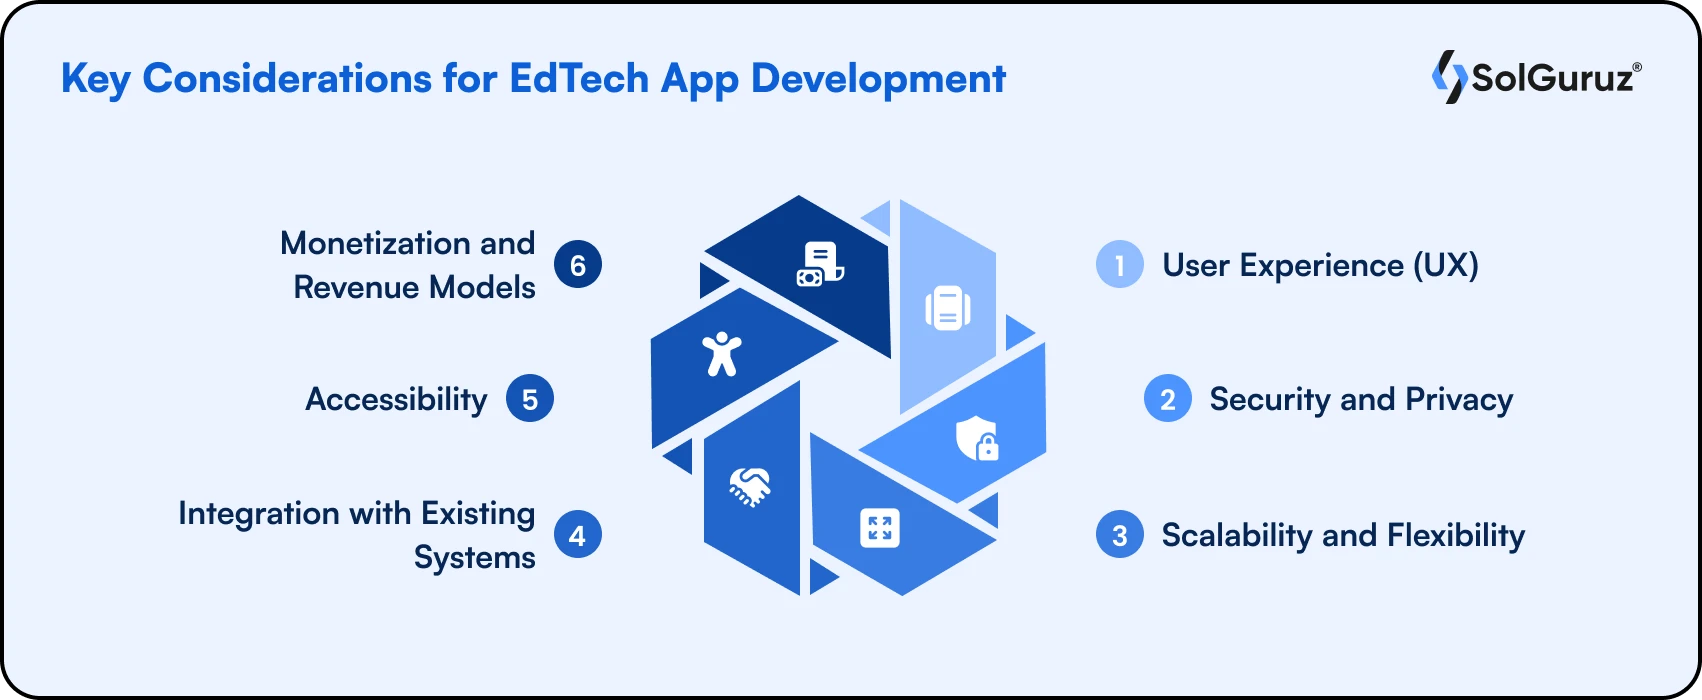 key considerations for EdTech app development, providing you with essential insights and guidance to ensure your app meets the diverse needs of its users.